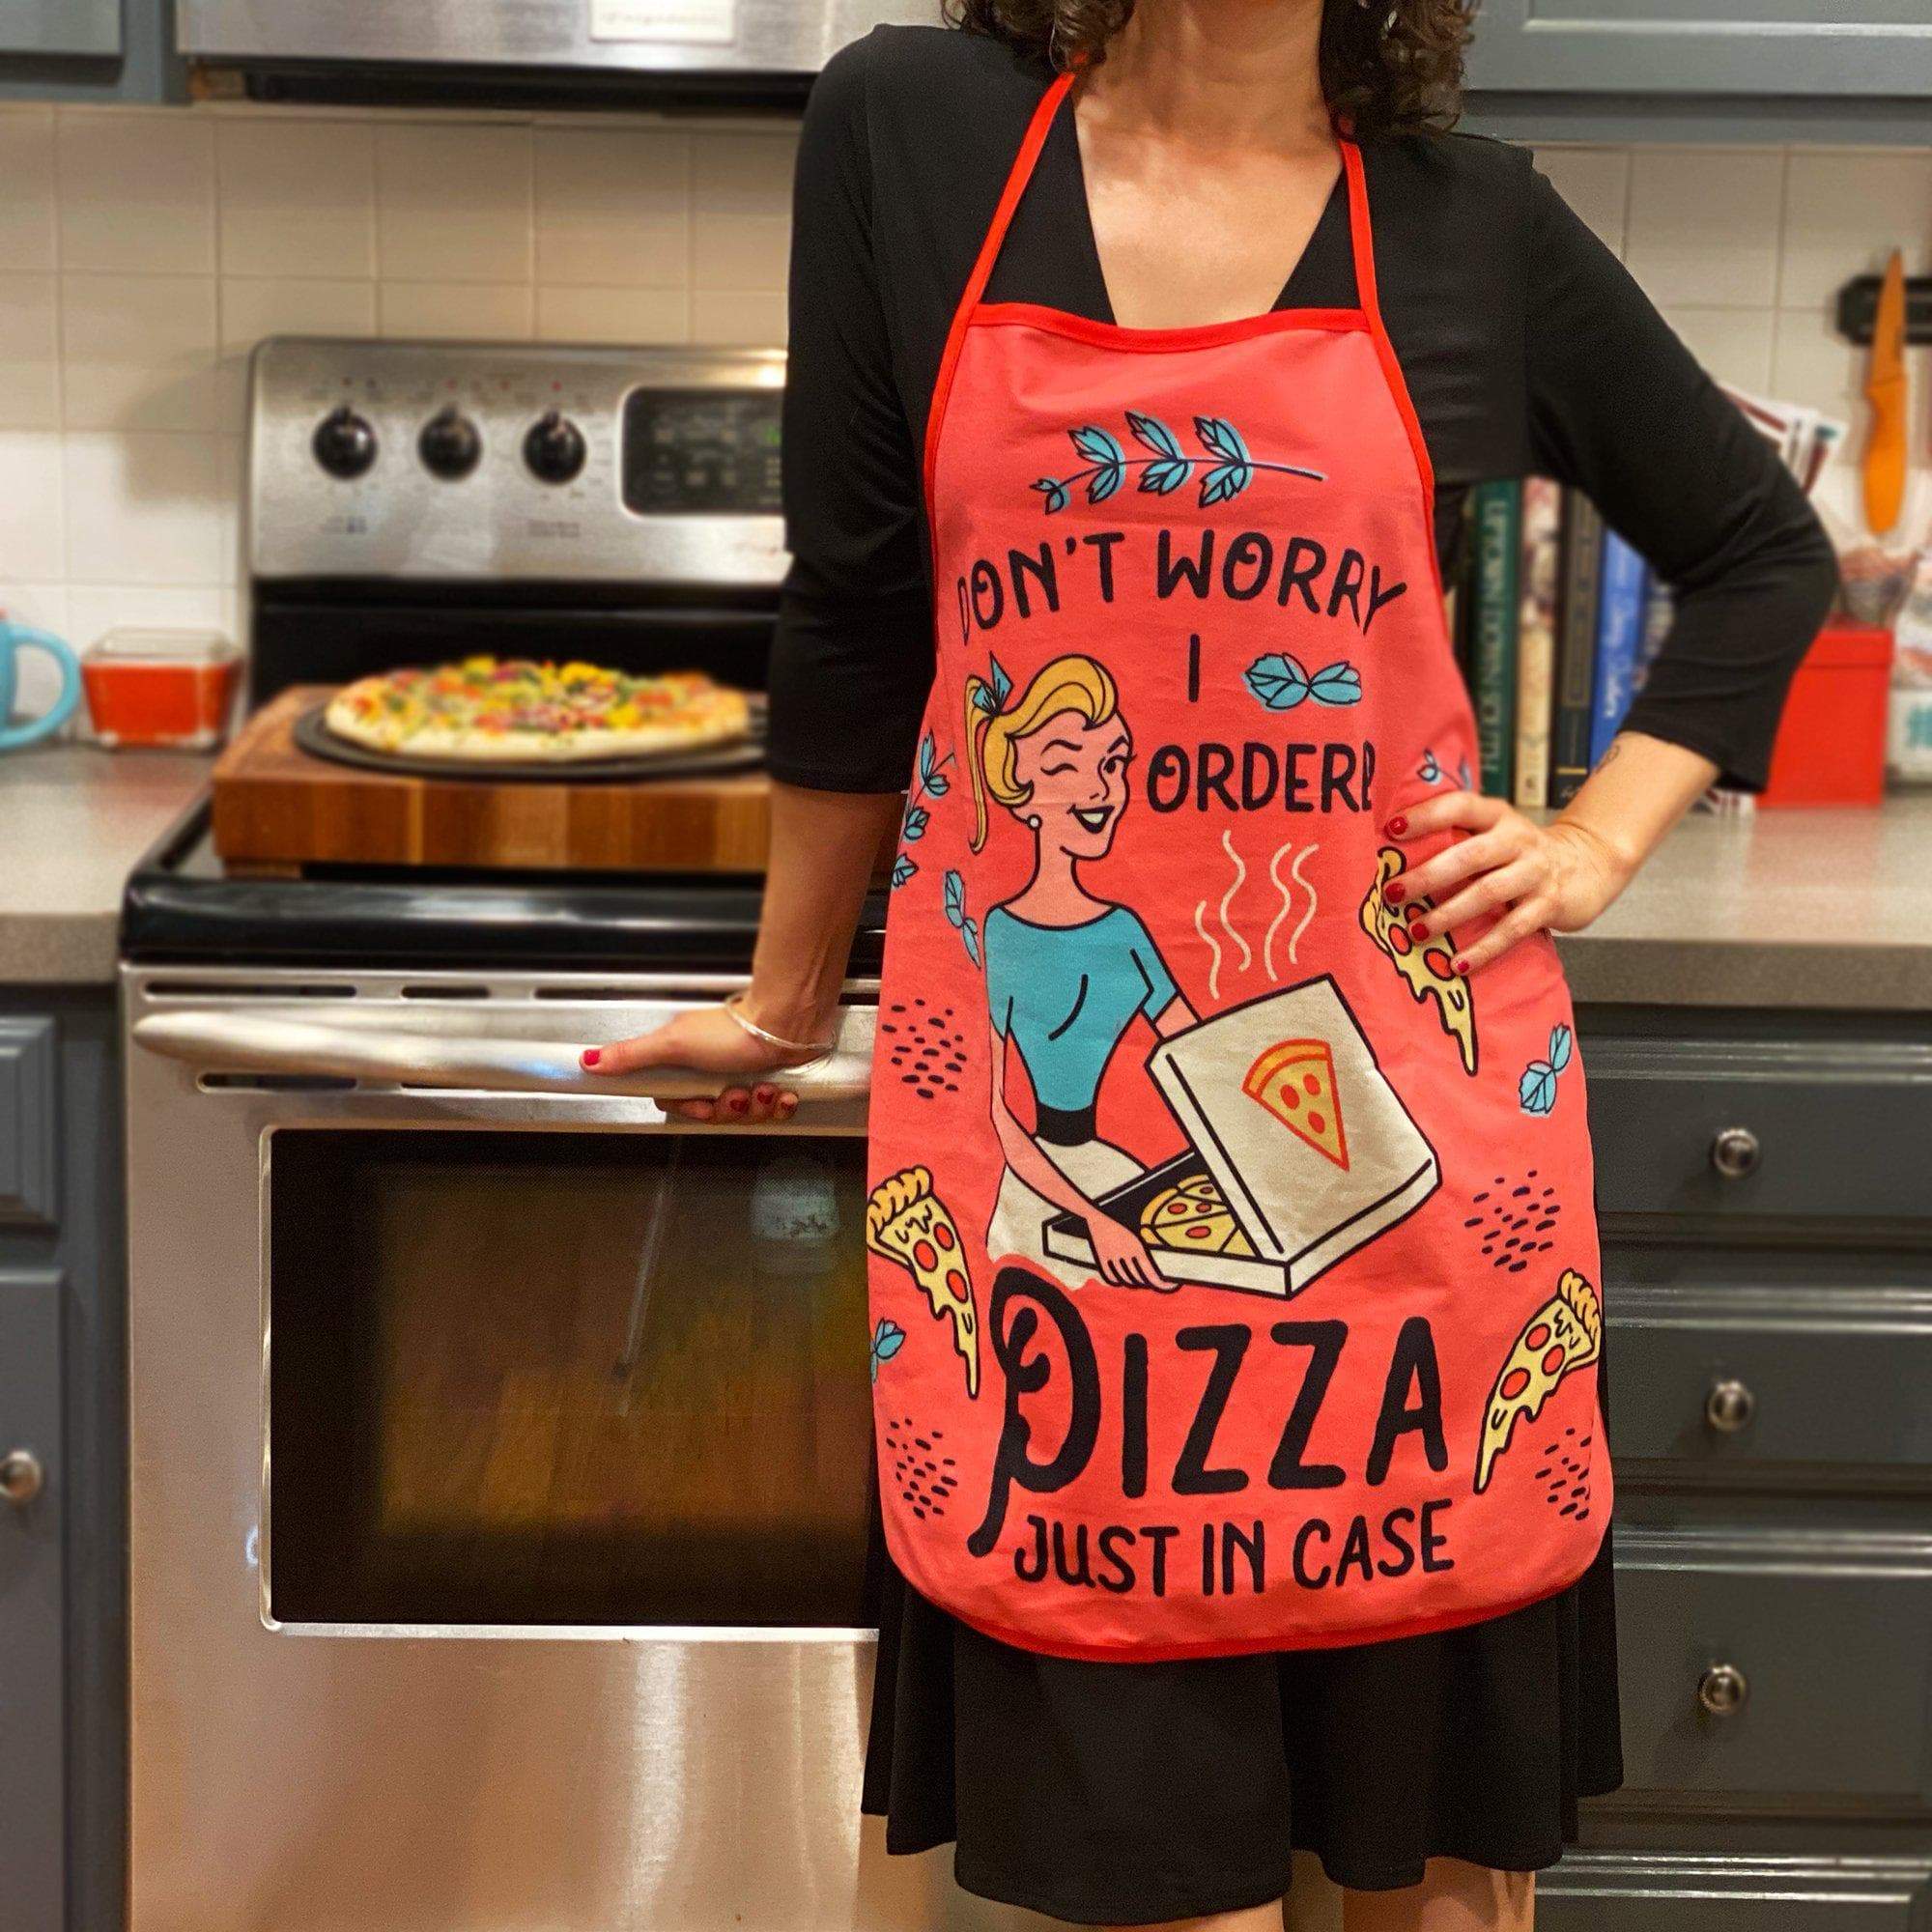 https://cdn.shopify.com/s/files/1/2959/1448/products/crazy-dog-t-shirts-oven-mitt-aprons-don-t-worry-i-ordered-pizza-just-in-case-oven-mitt-apron-28516018946163_2000x.jpg?v=1631978519